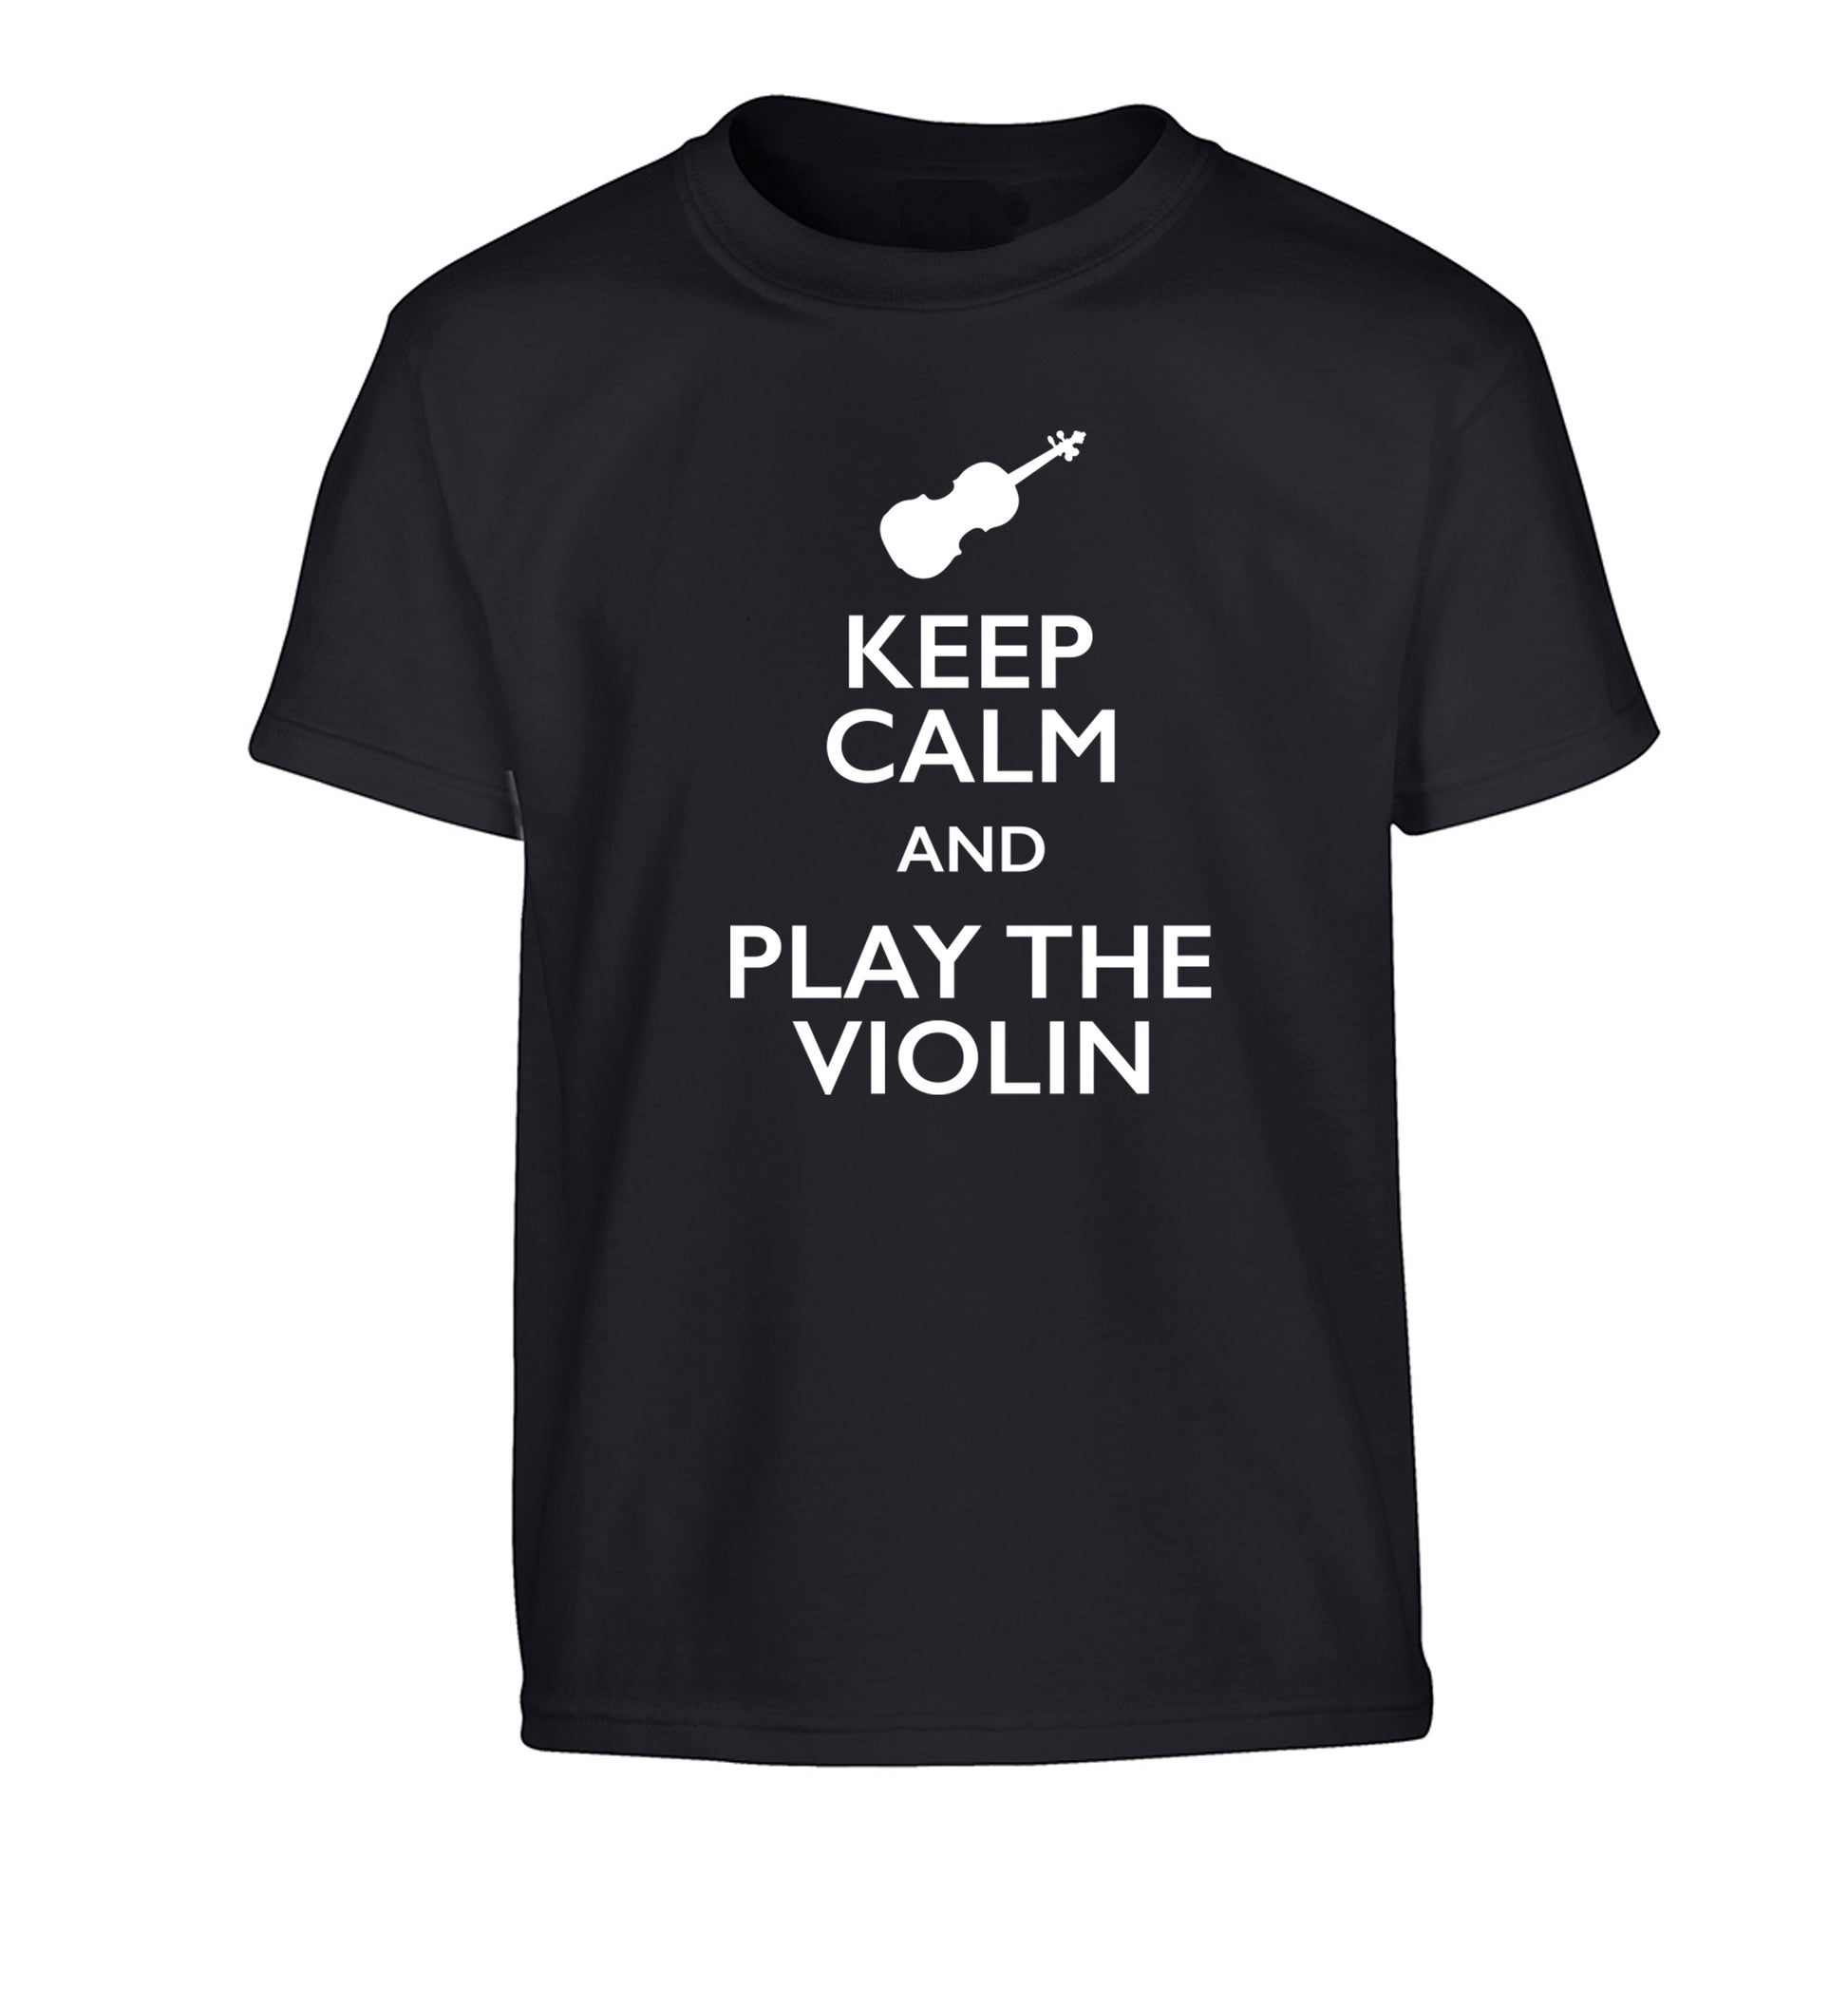 Keep calm and play the violin Children's black Tshirt 12-13 Years